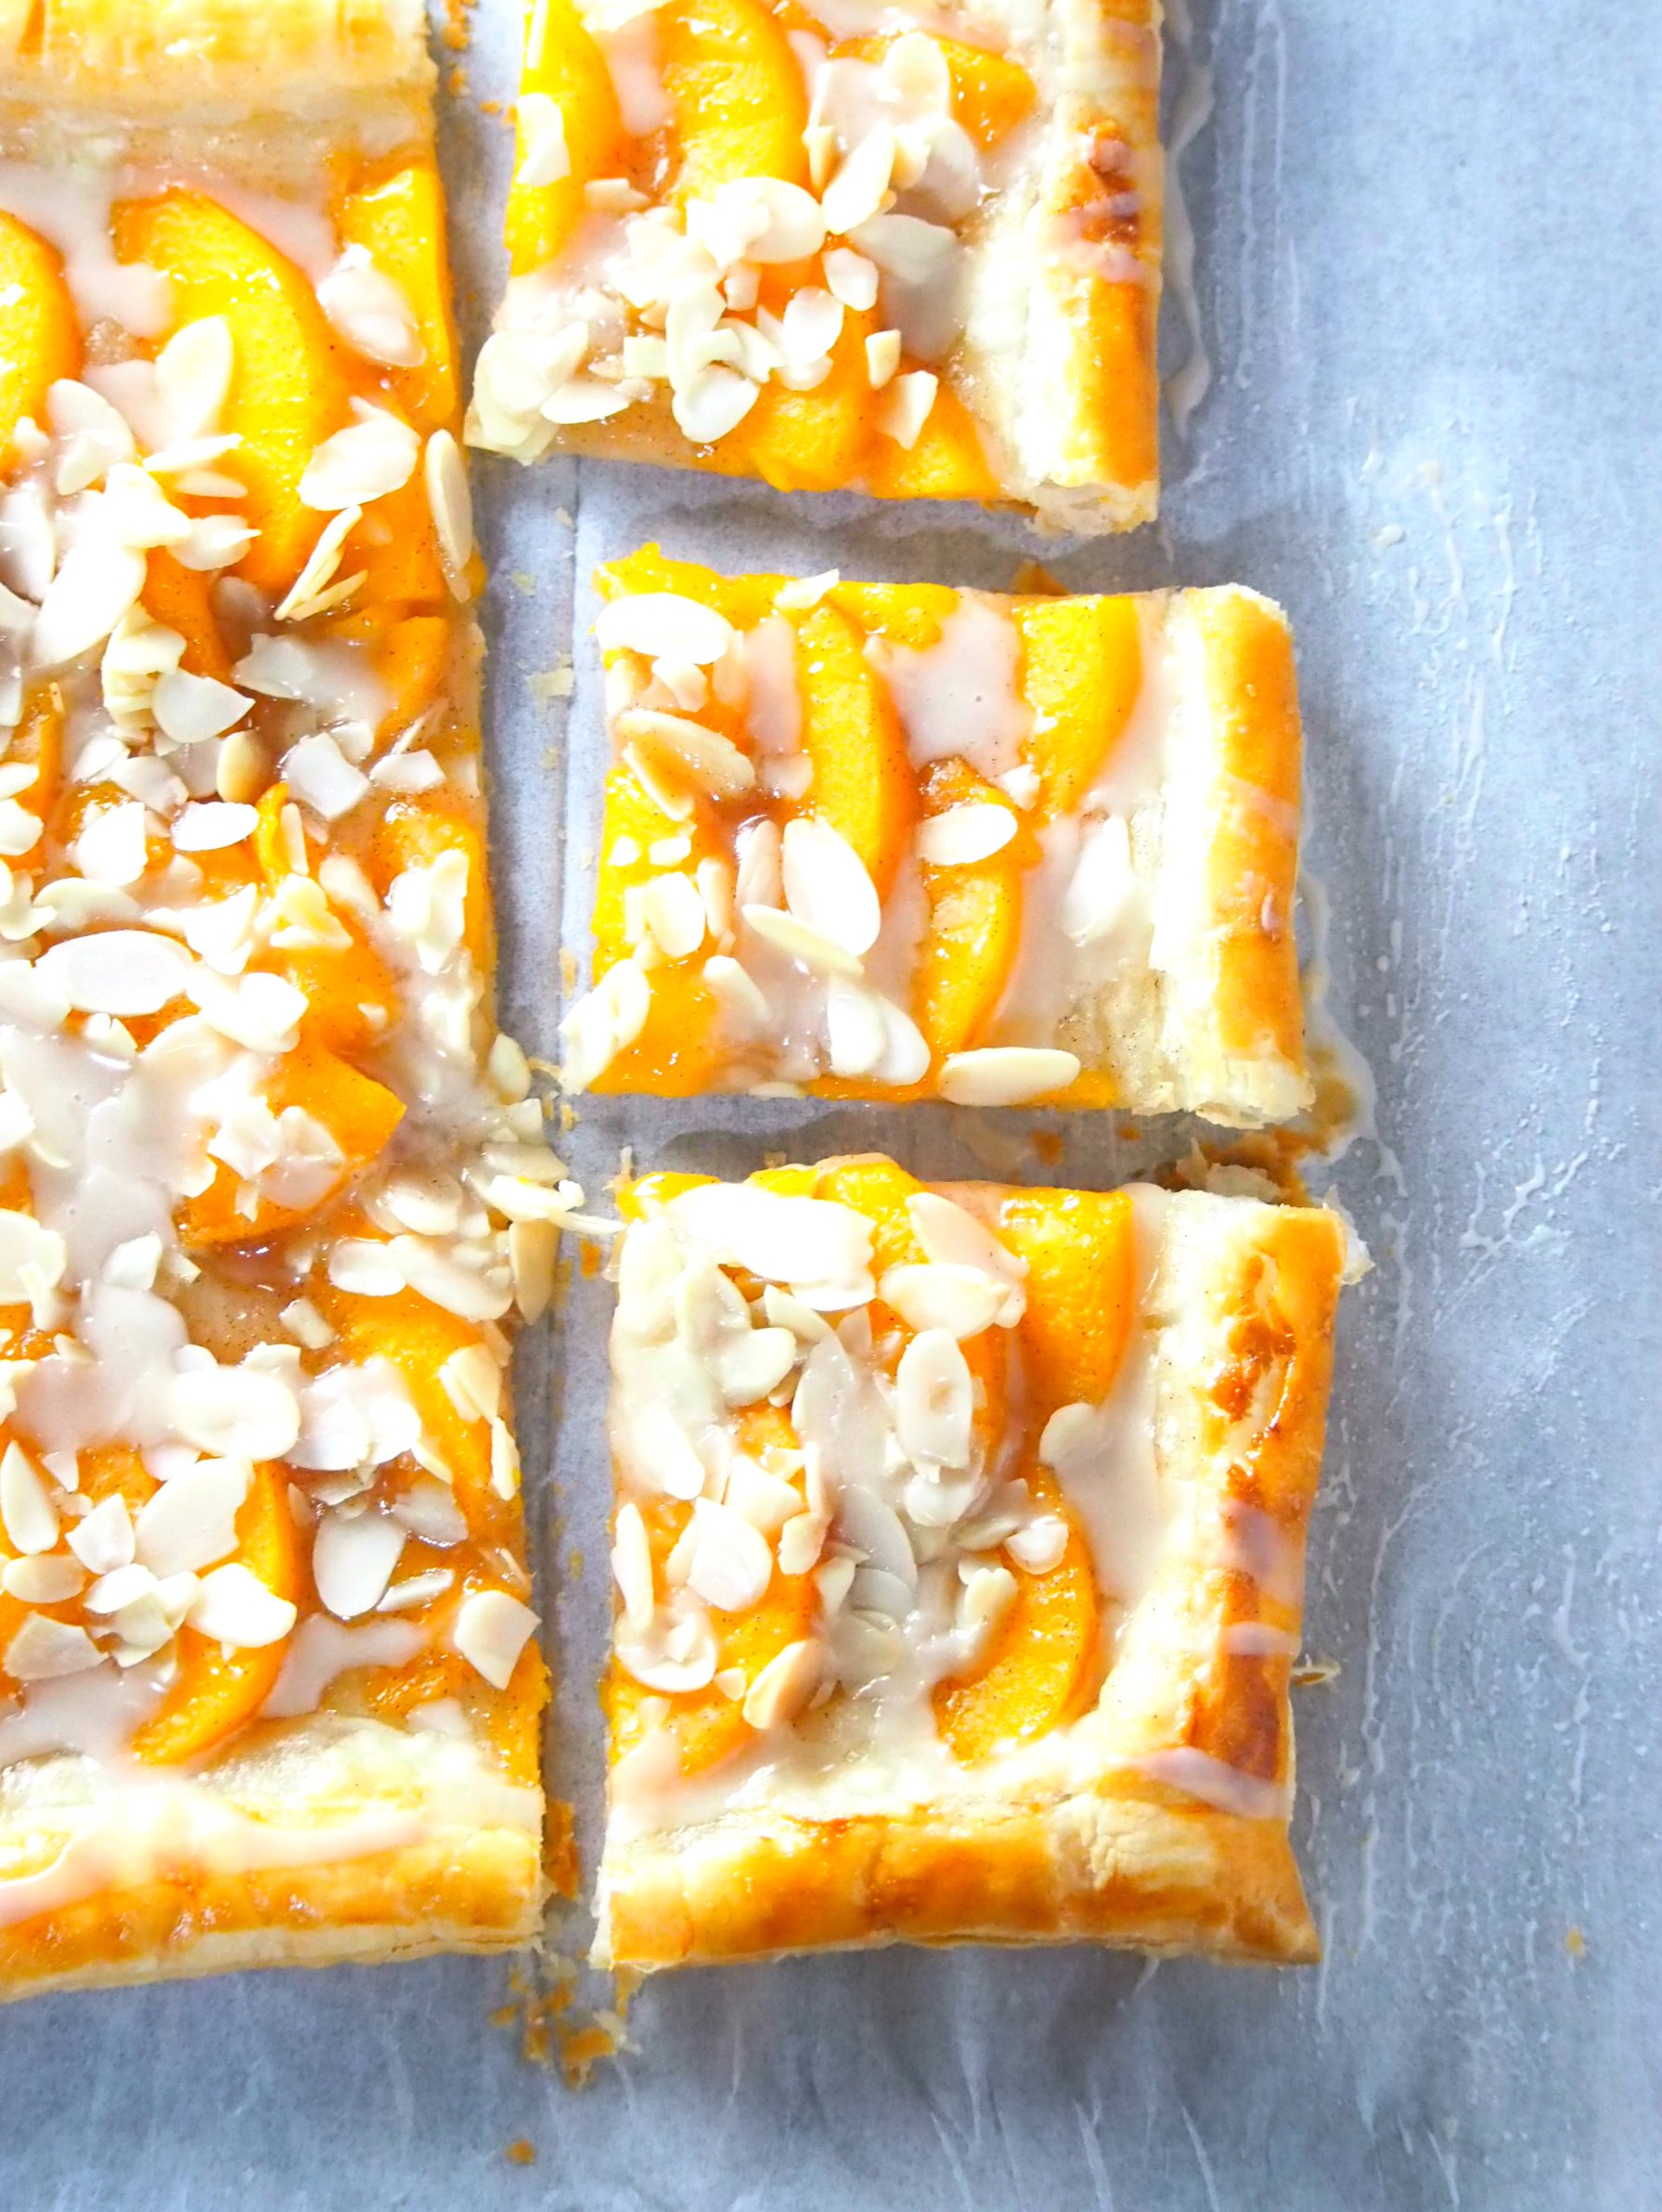 This peach tart is a delicious and easy peach dessert recipe that uses read-made puff pastry and yields a fresh, butteyr and flaky pastry dessert.